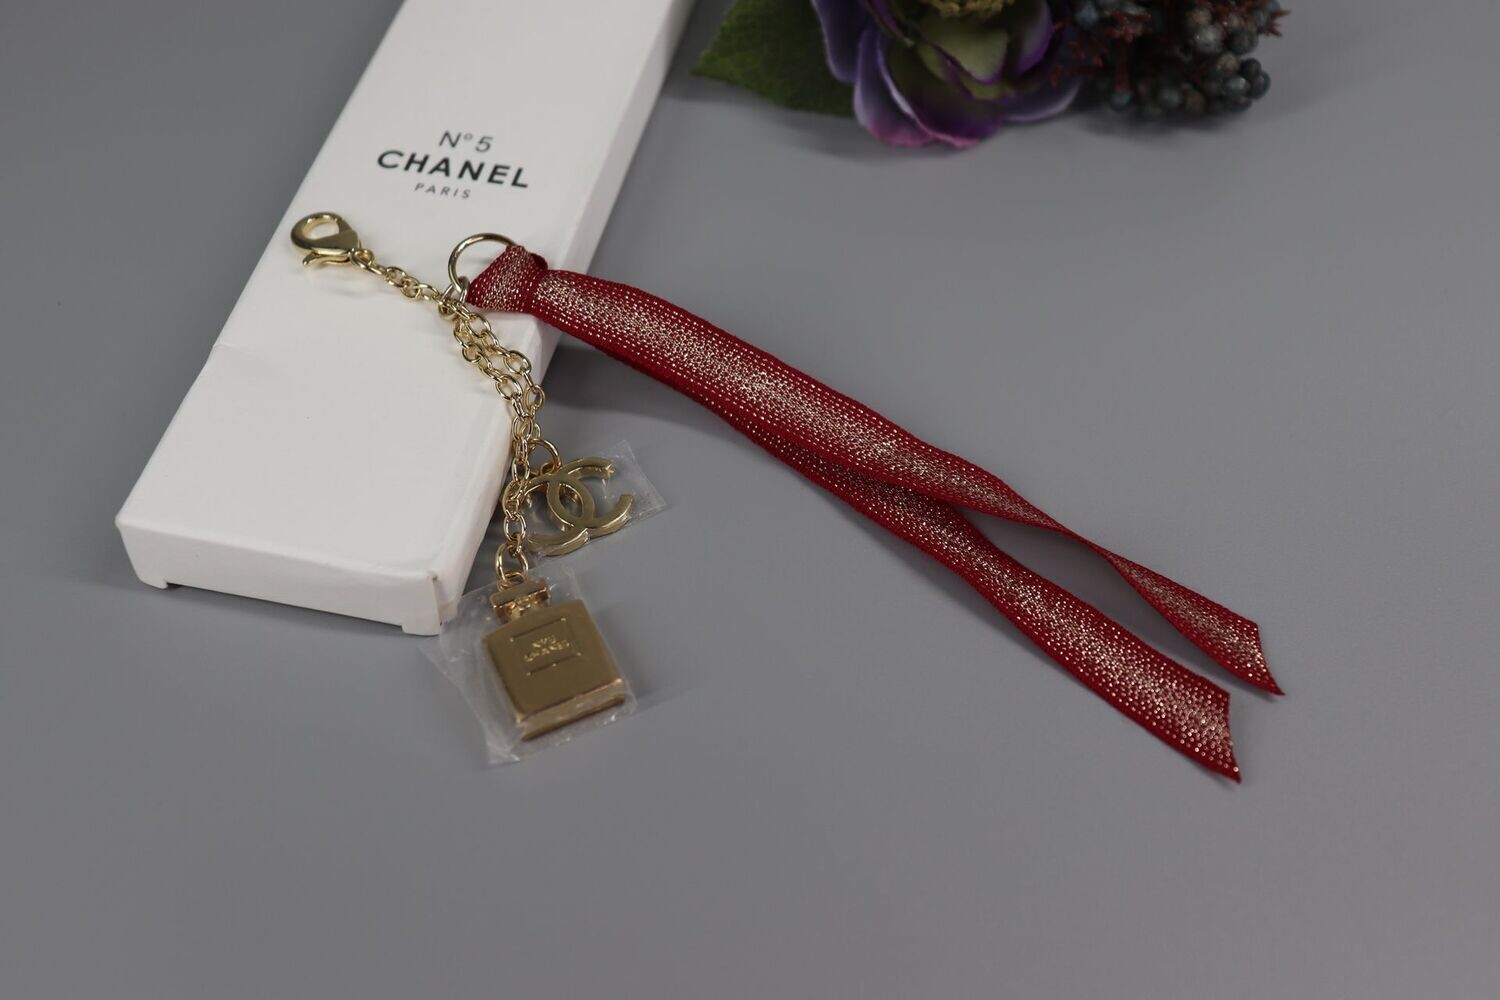 New* Chanel Beauty Charm Limited Edition